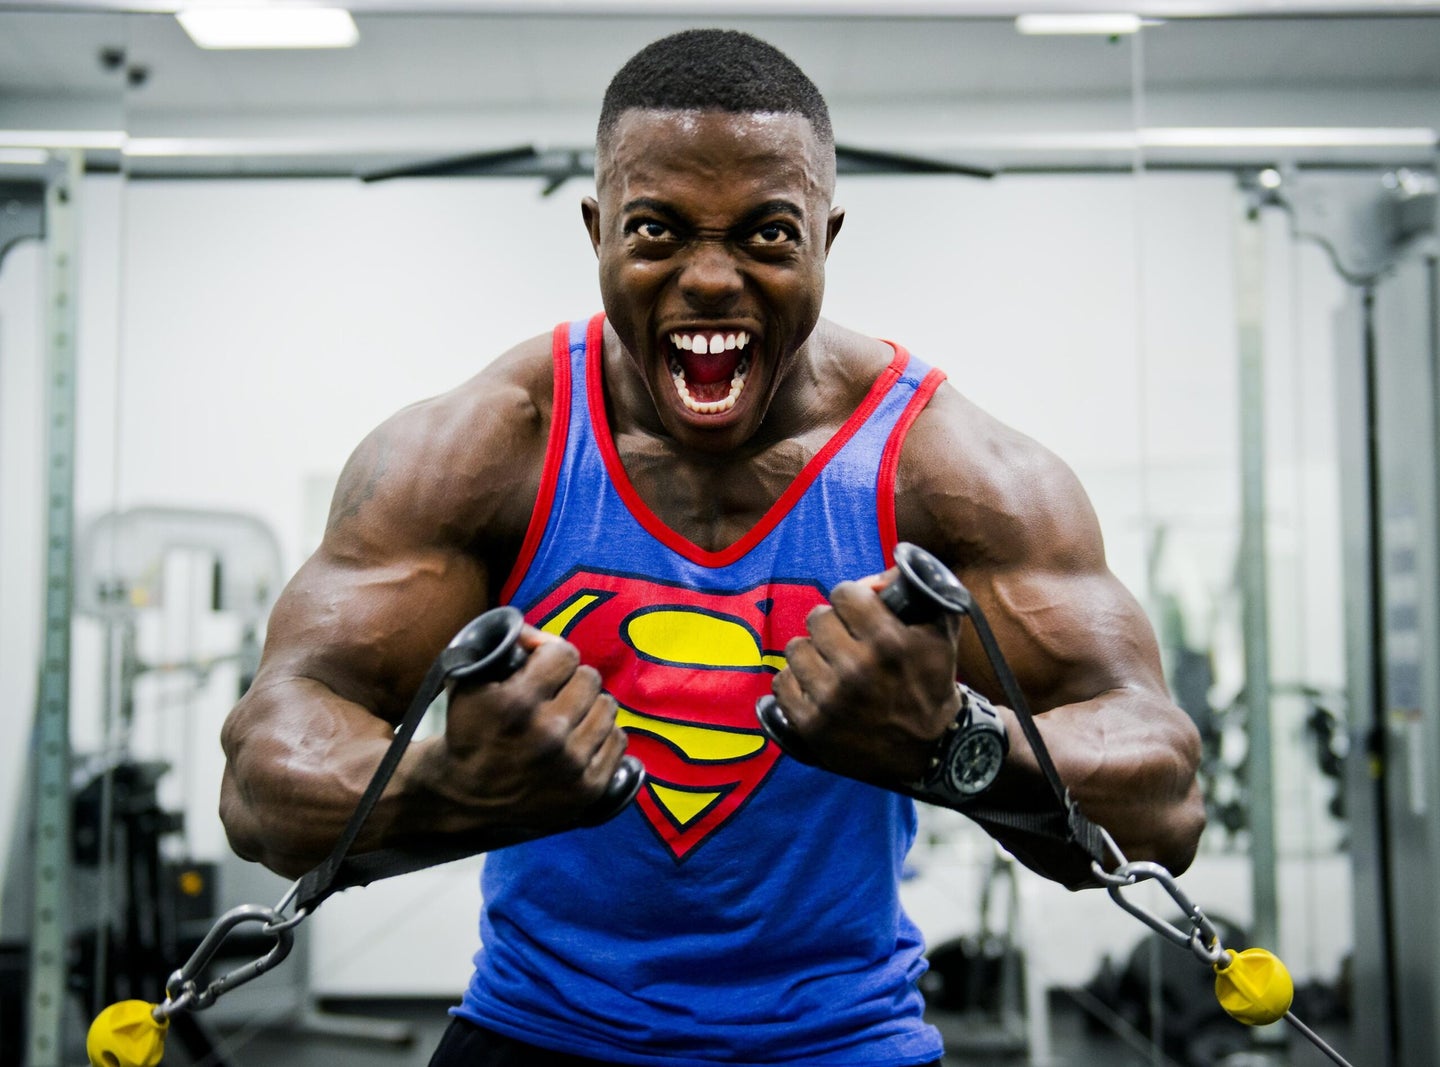 Black body builder in a Superman tank yelling as they pull arm weights to keep their New Year's resolution to stay fit